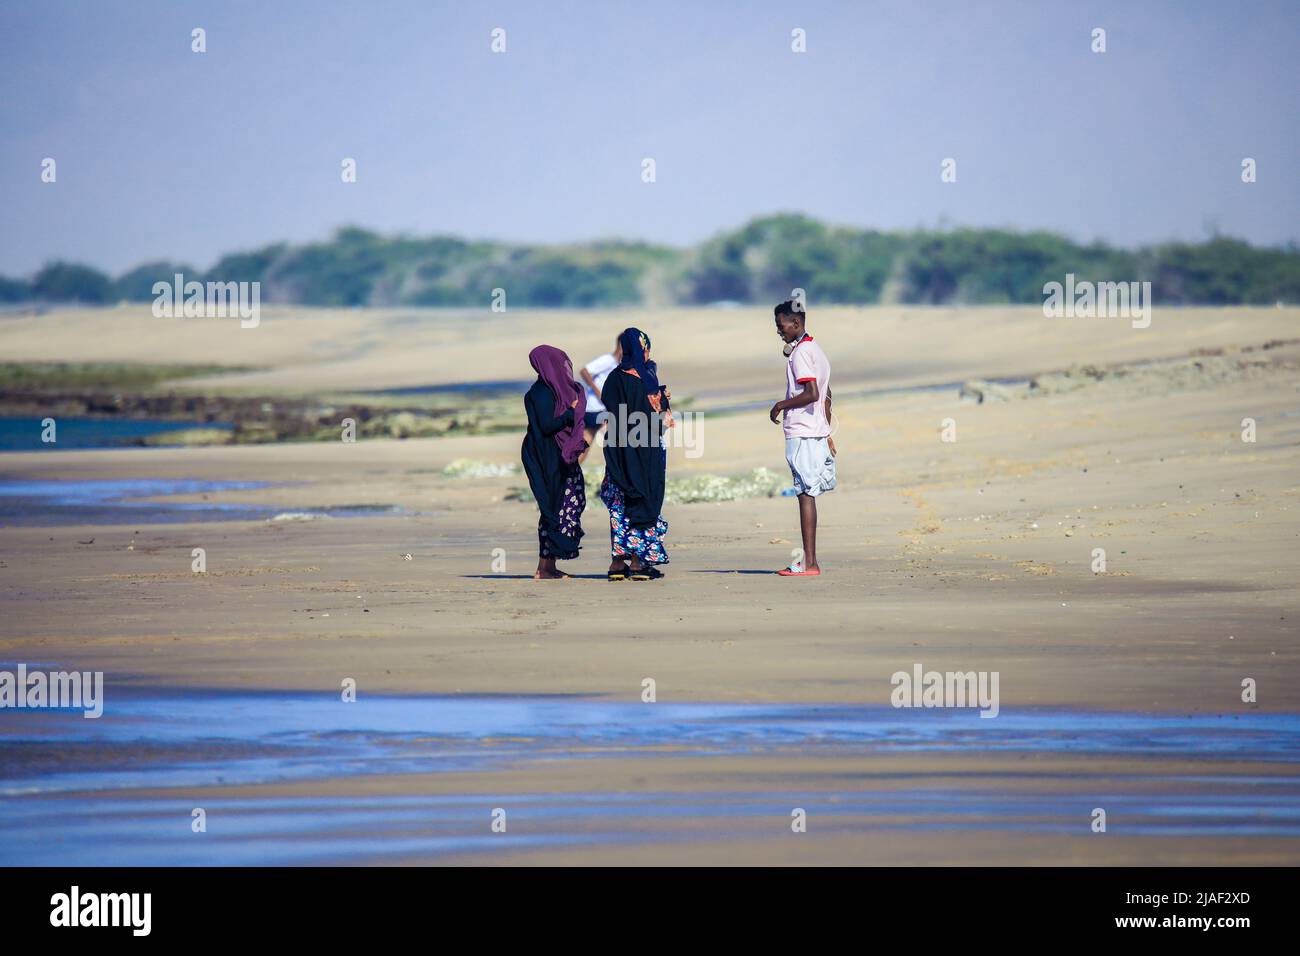 Local people on the Berbera streets Stock Photo